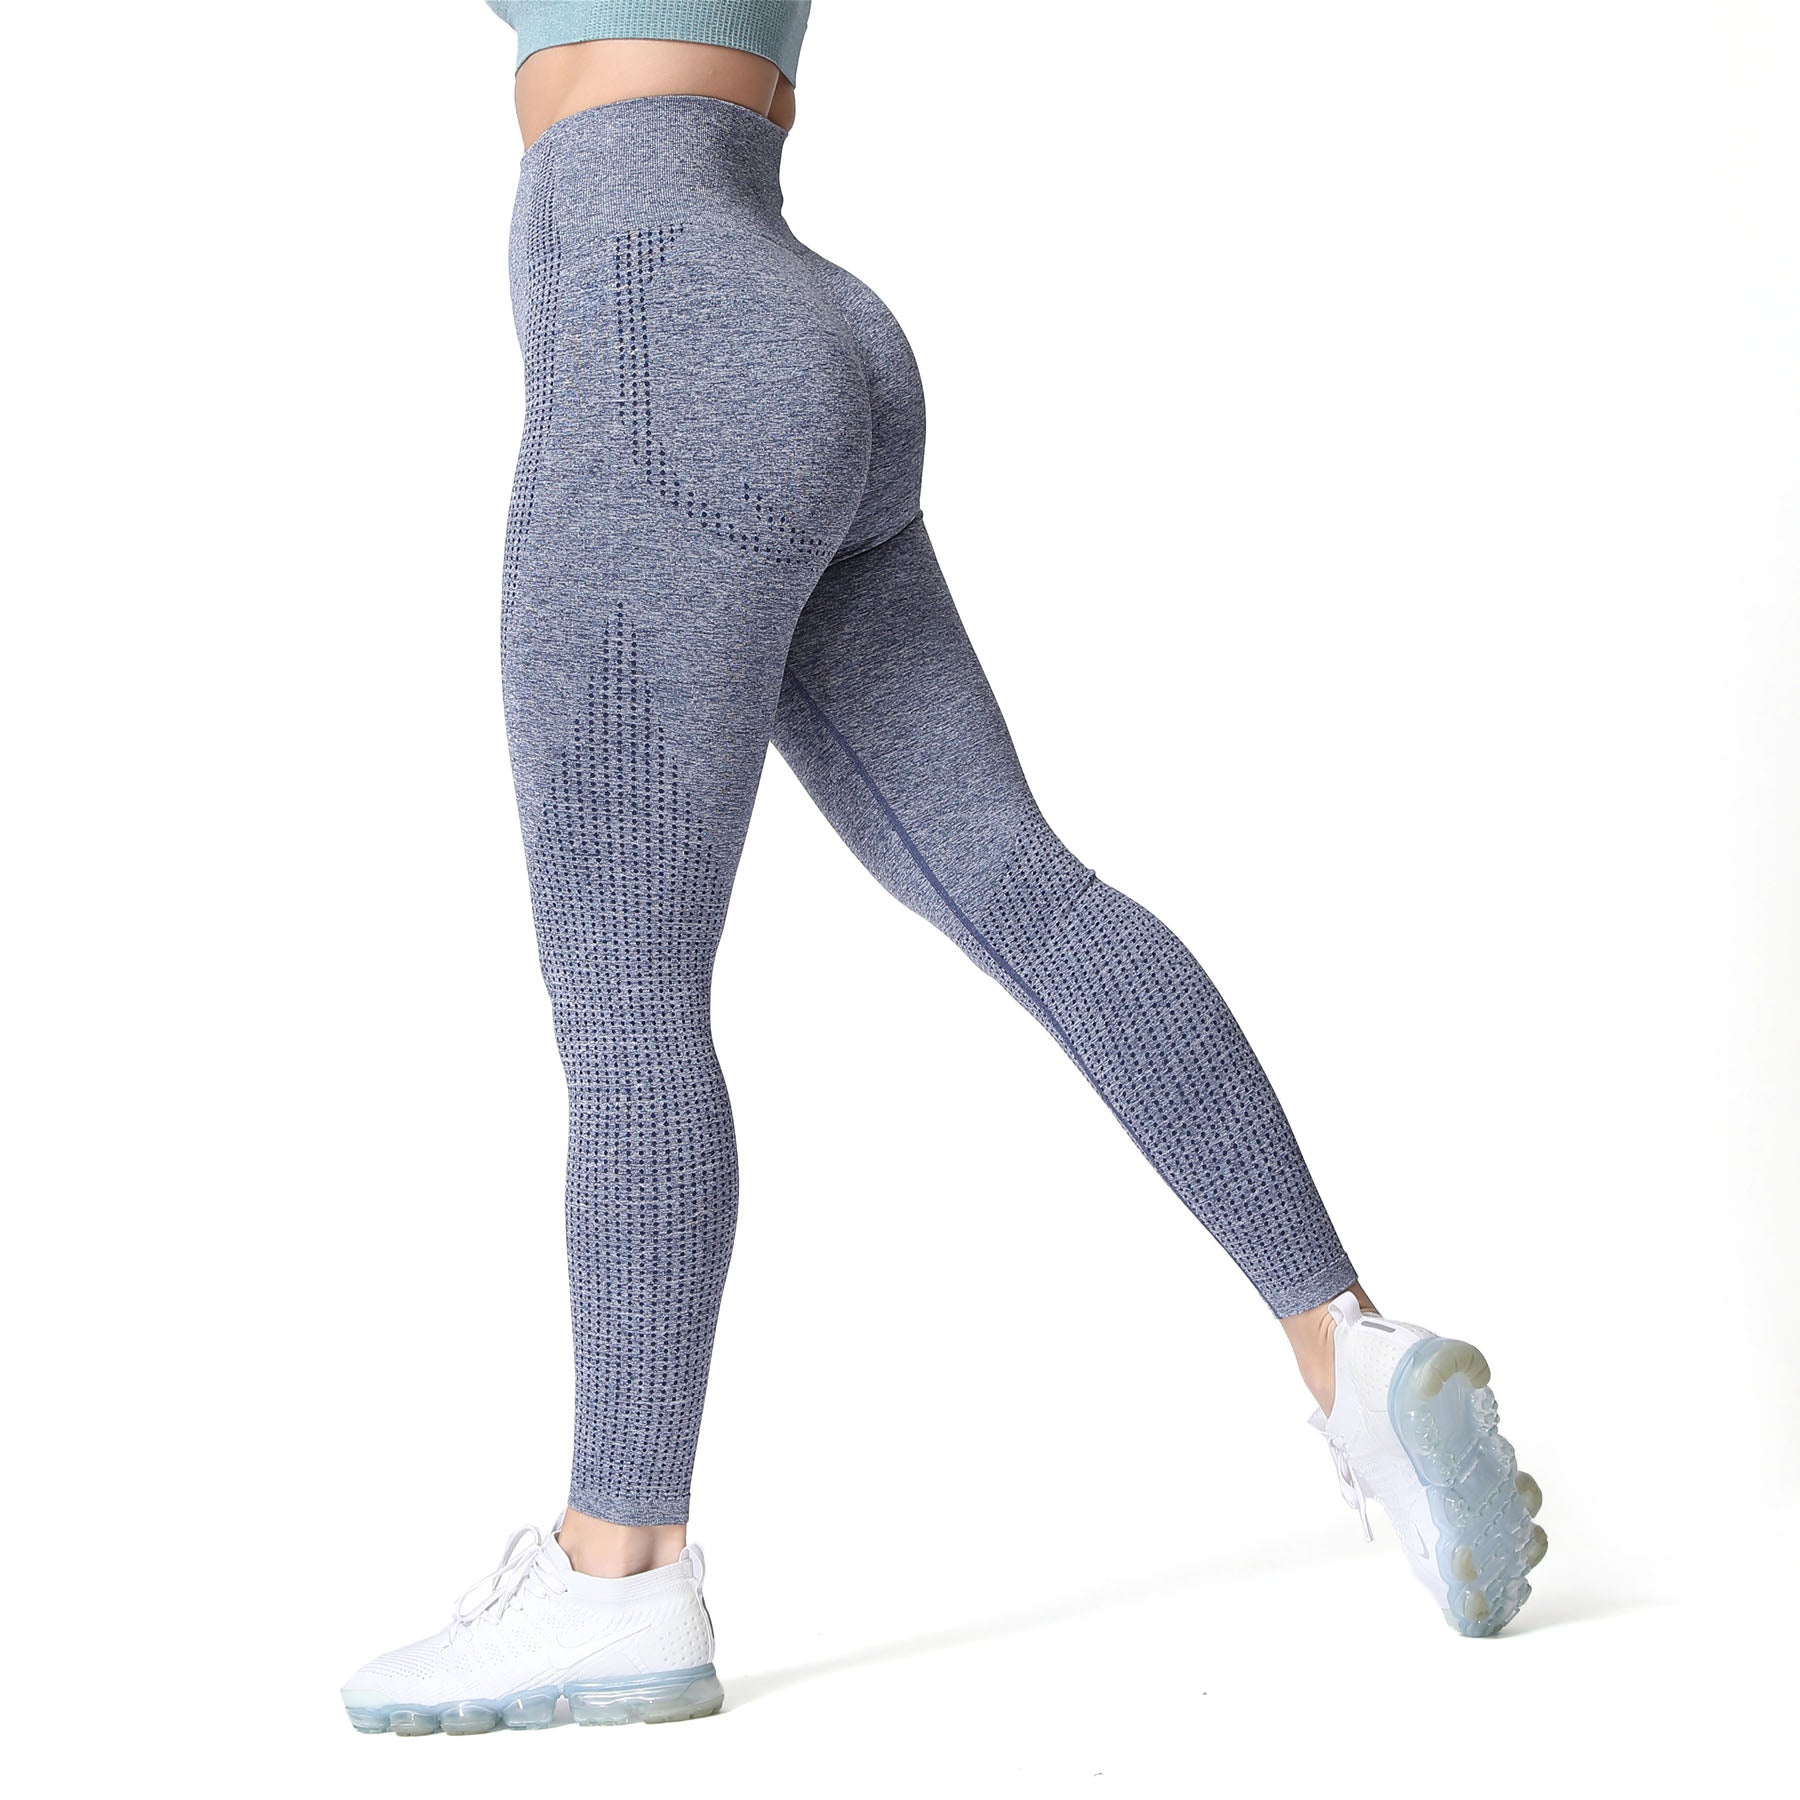 Aoxjox Leggings & Women's Activewear for WAY LESS!